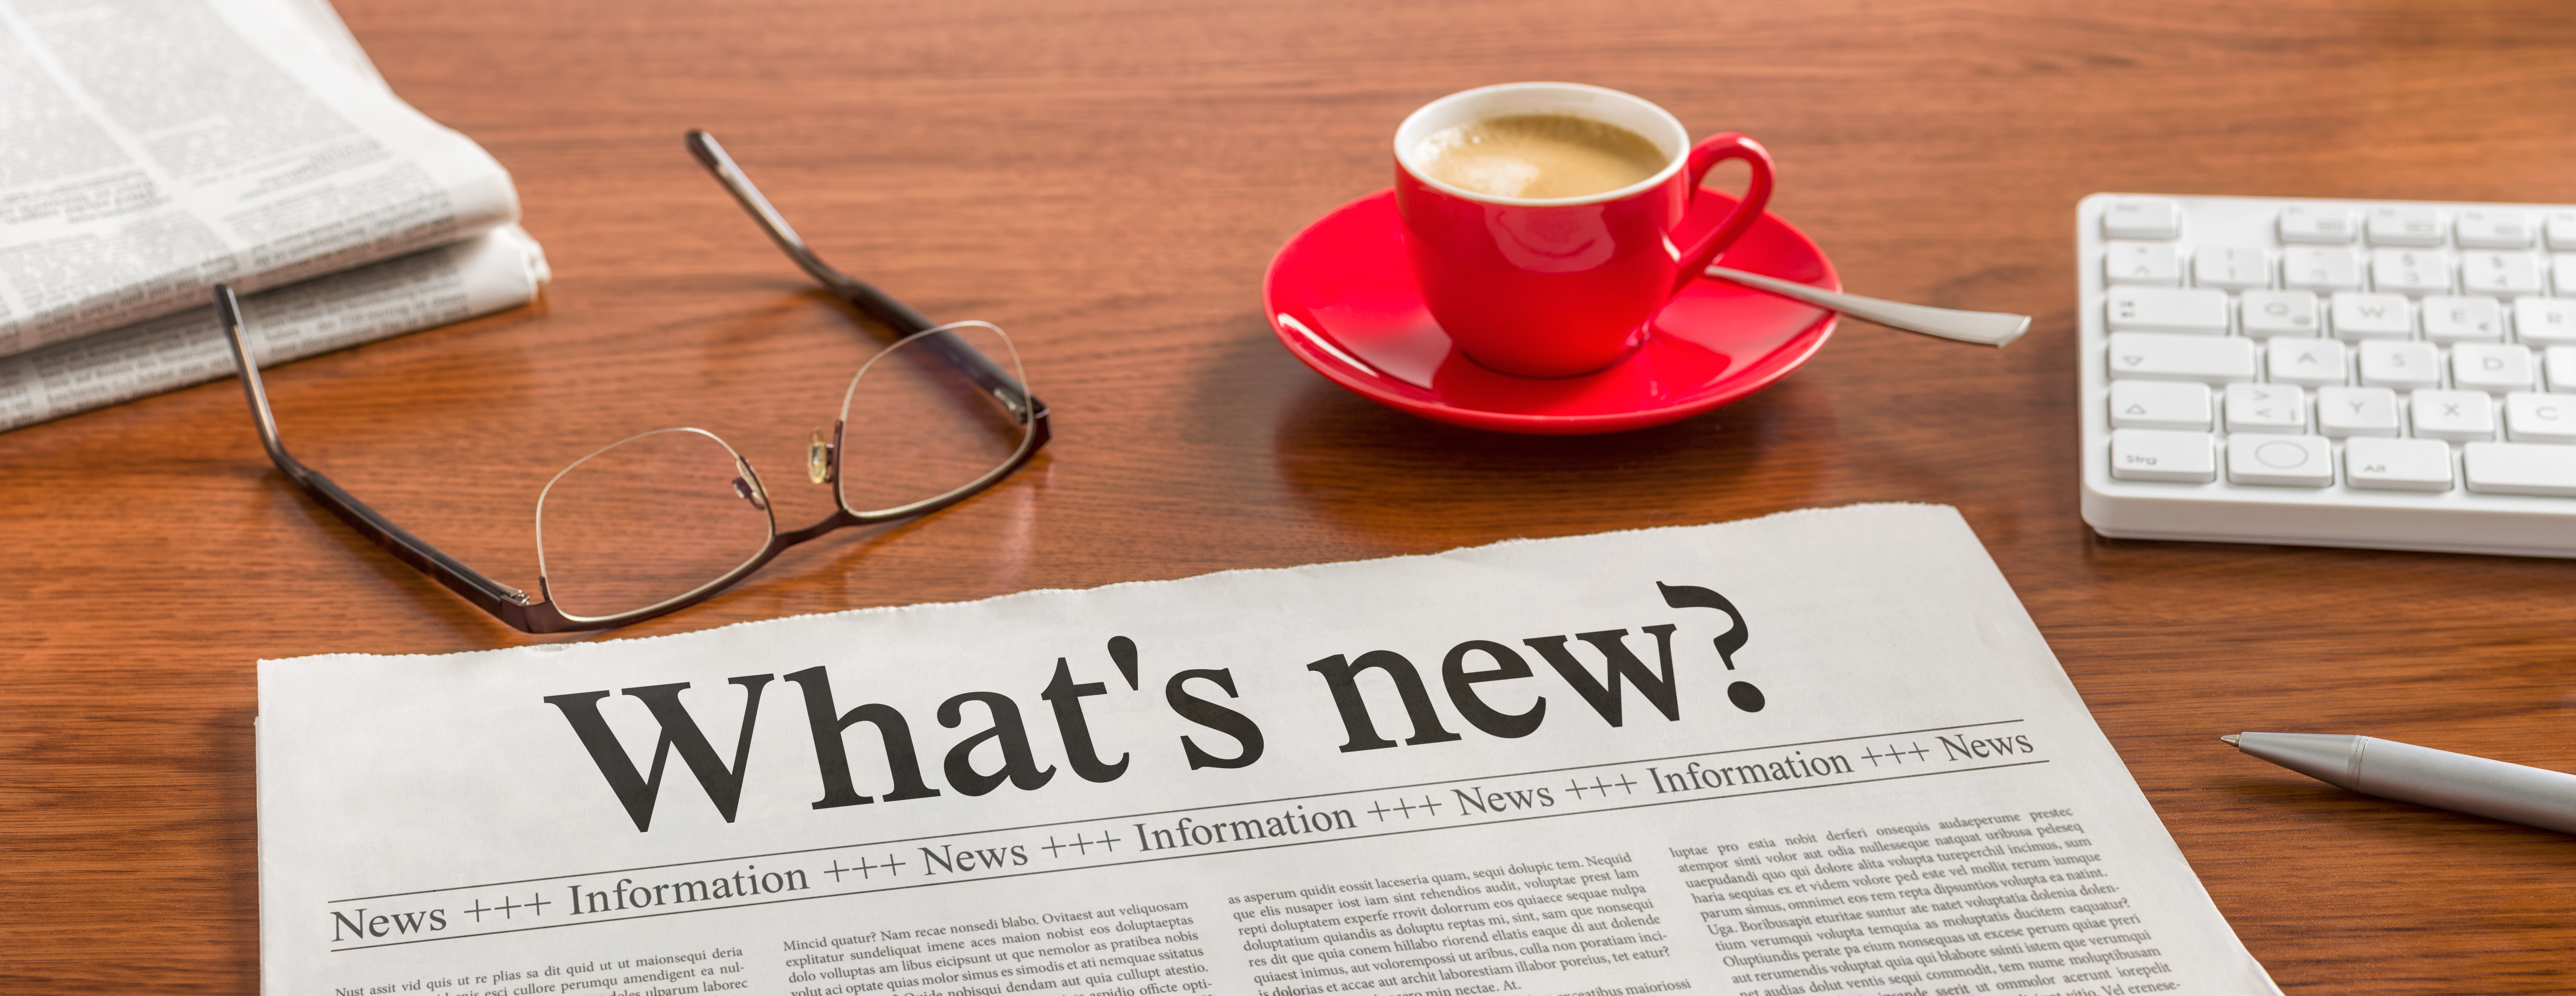 image of newspaper on desk with the title, "What's new?"